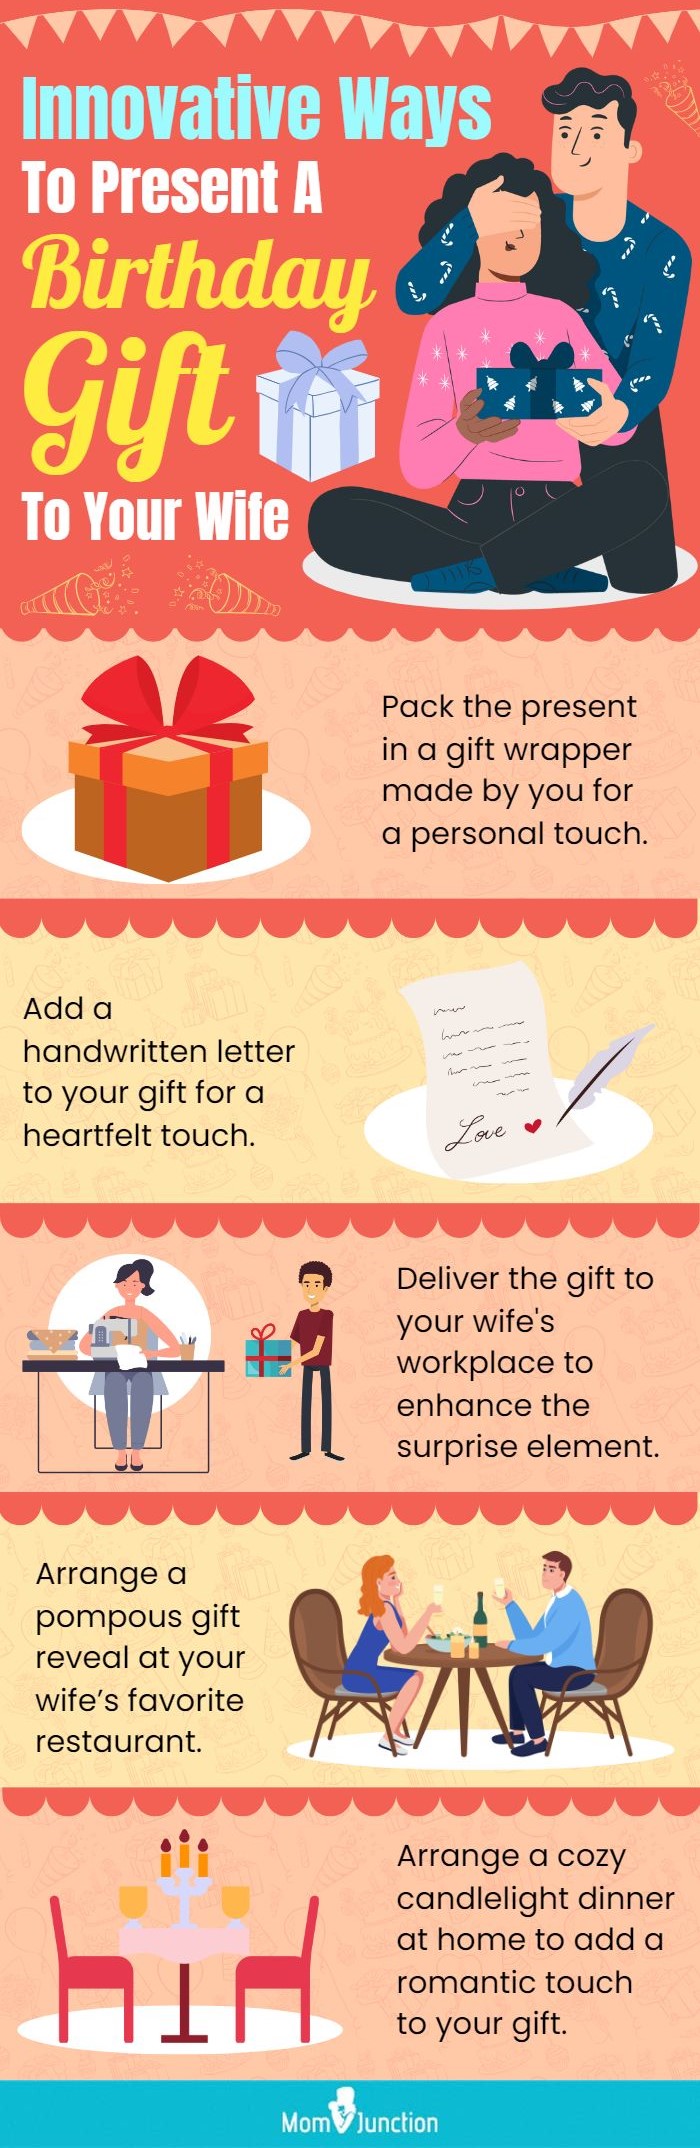 Innovative Ways To Present A Birthday Gift To Your Wife(infographic)